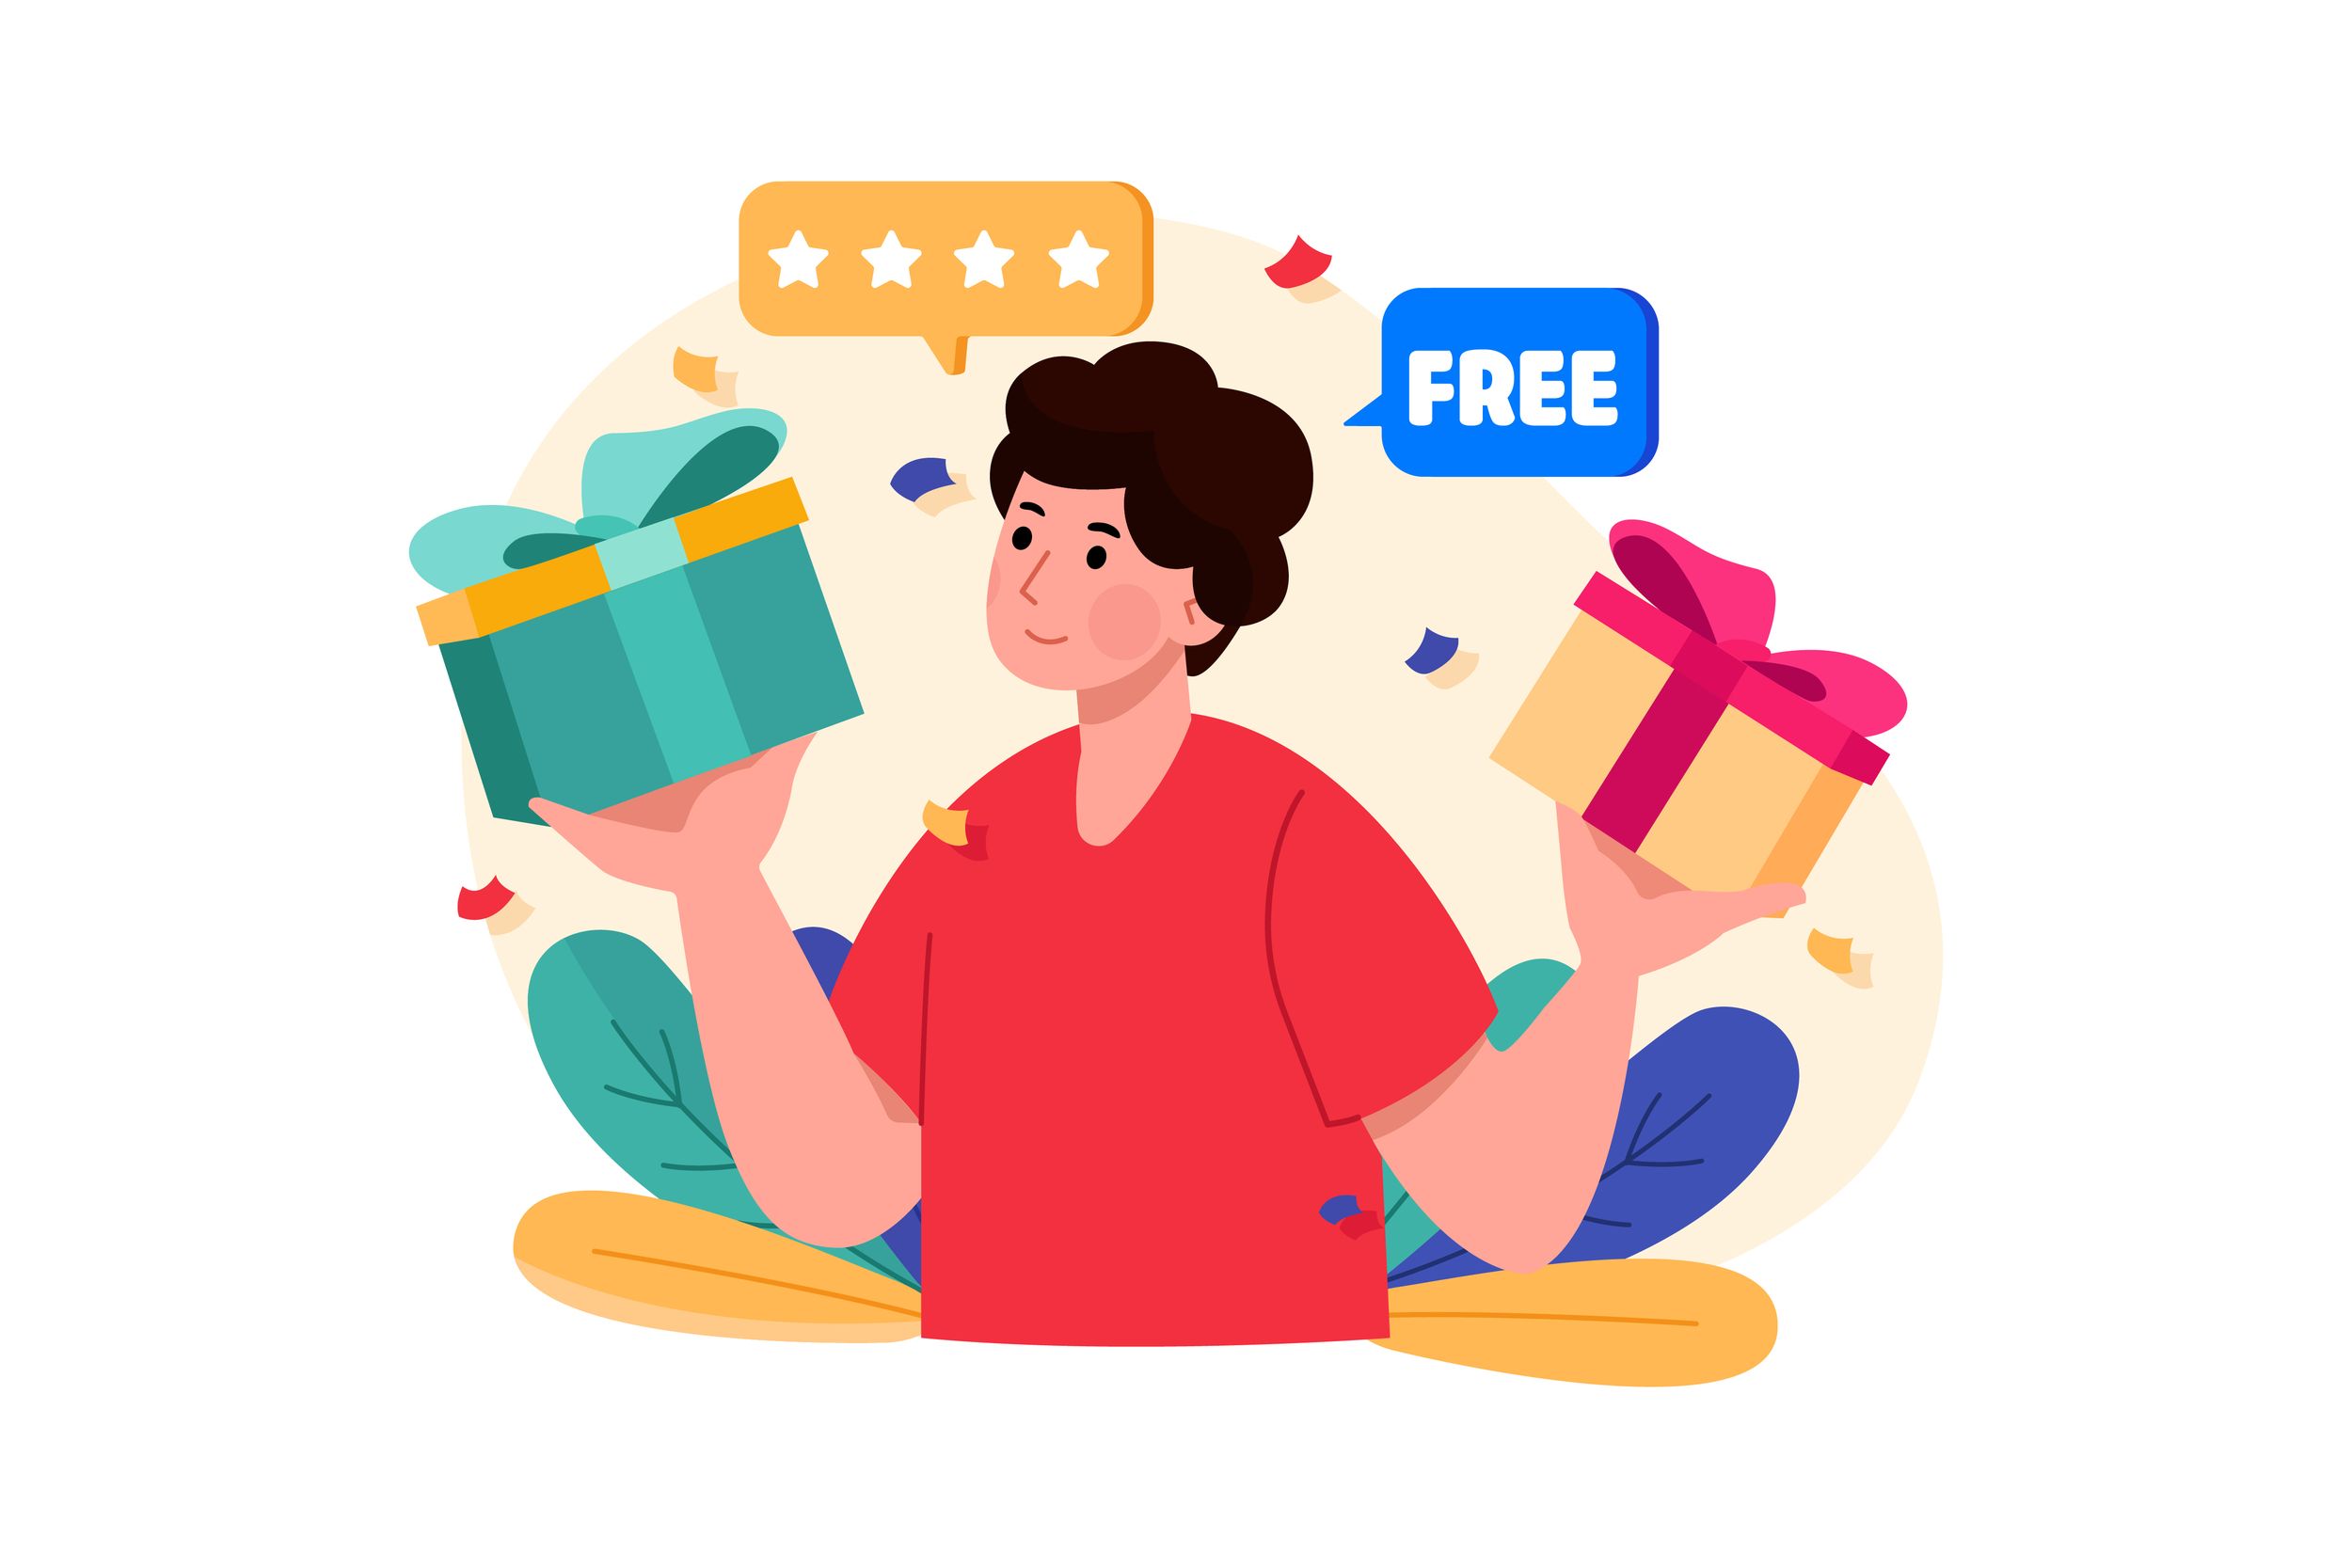 free_gift_complimentary